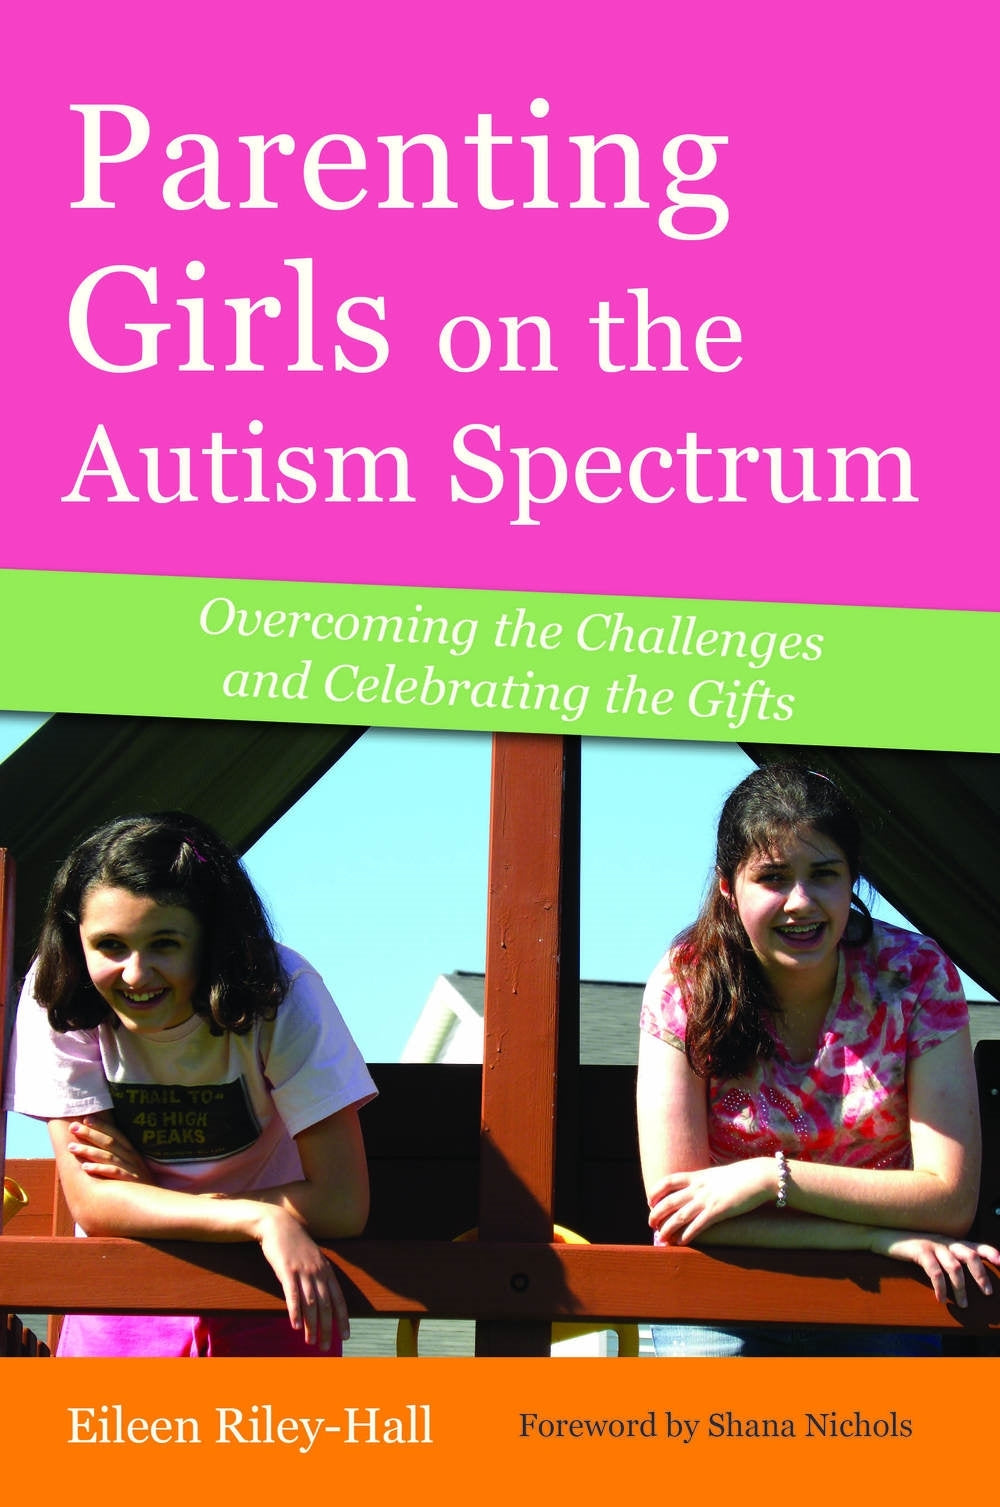 Parenting Girls on the Autism Spectrum by Shana Nichols, Eileen Riley-Hall